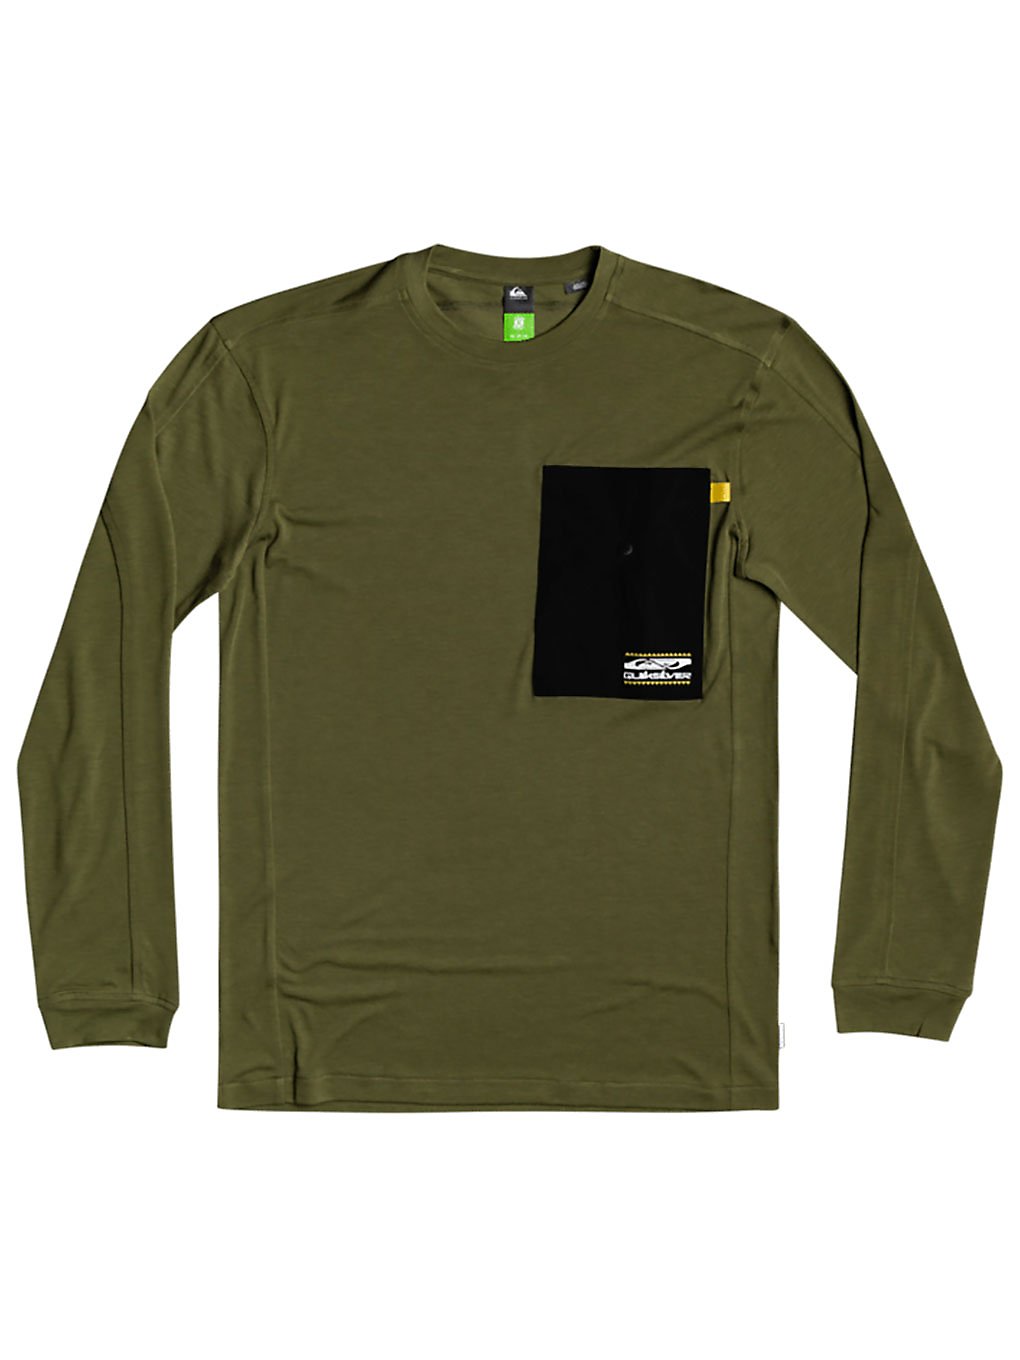 Quiksilver Dry Valley Long Sleeve T-Shirt olive branch